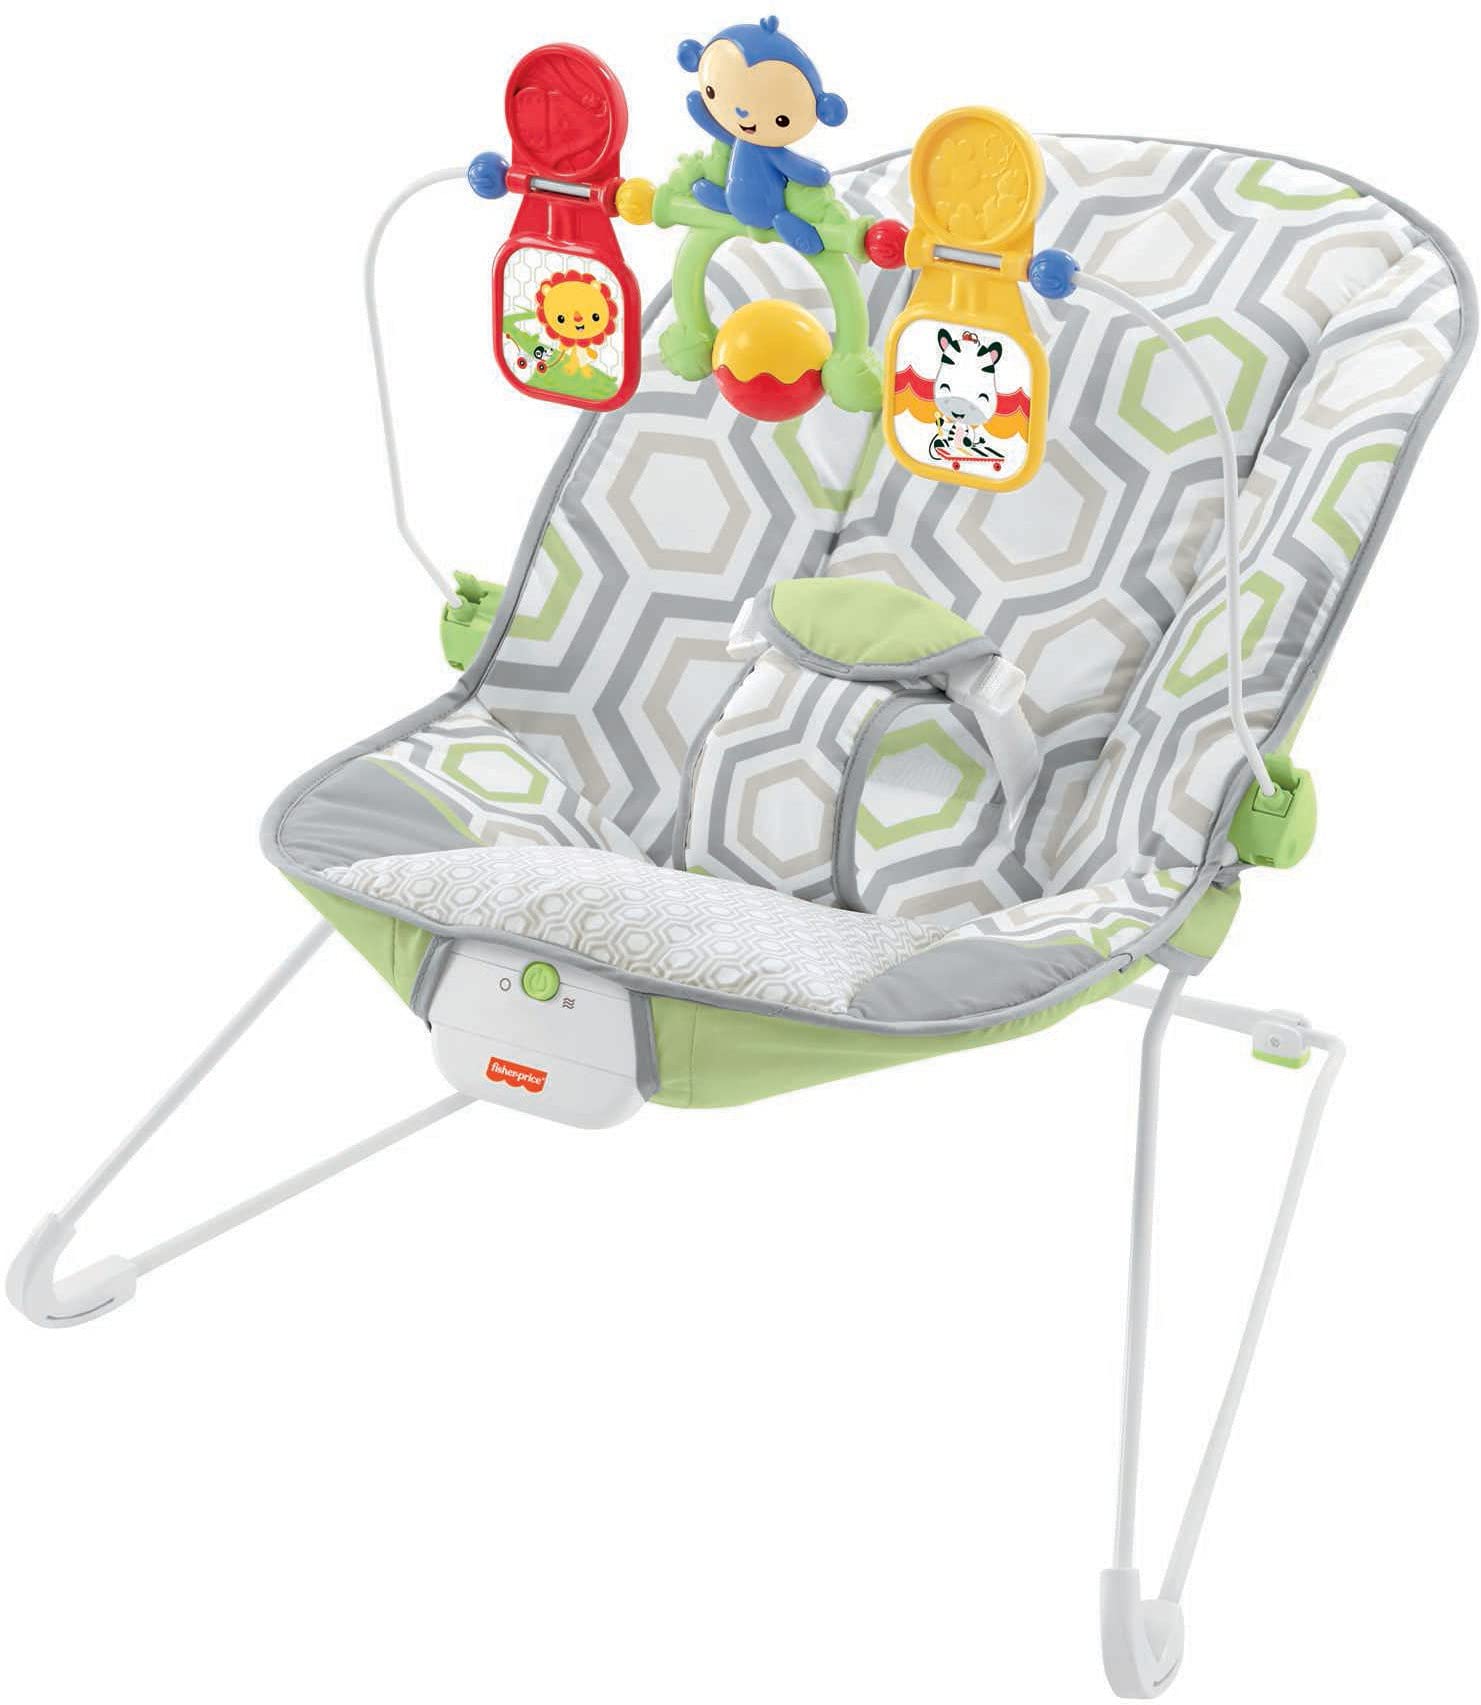 FISHER PRICE BASIC BOUNCER